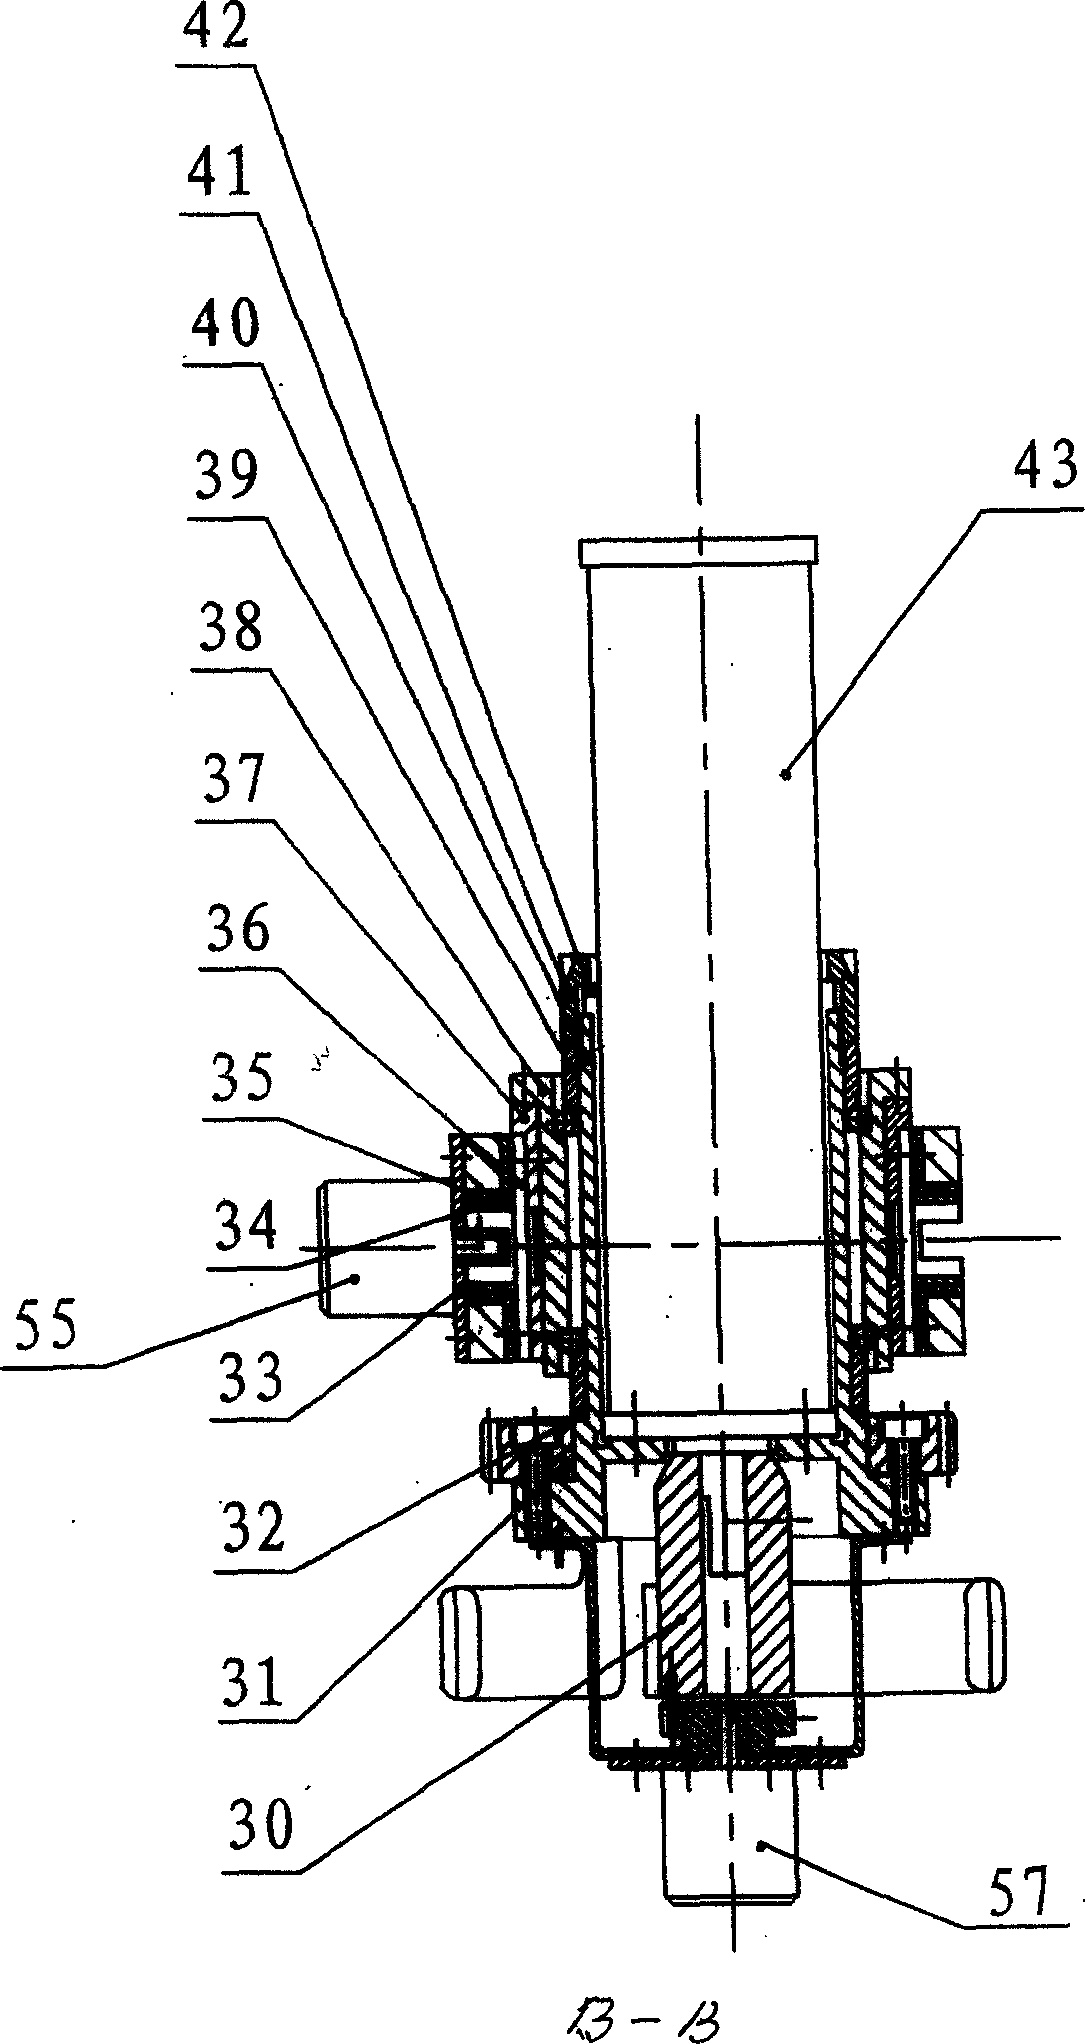 Main operation hand with clamping force sensation